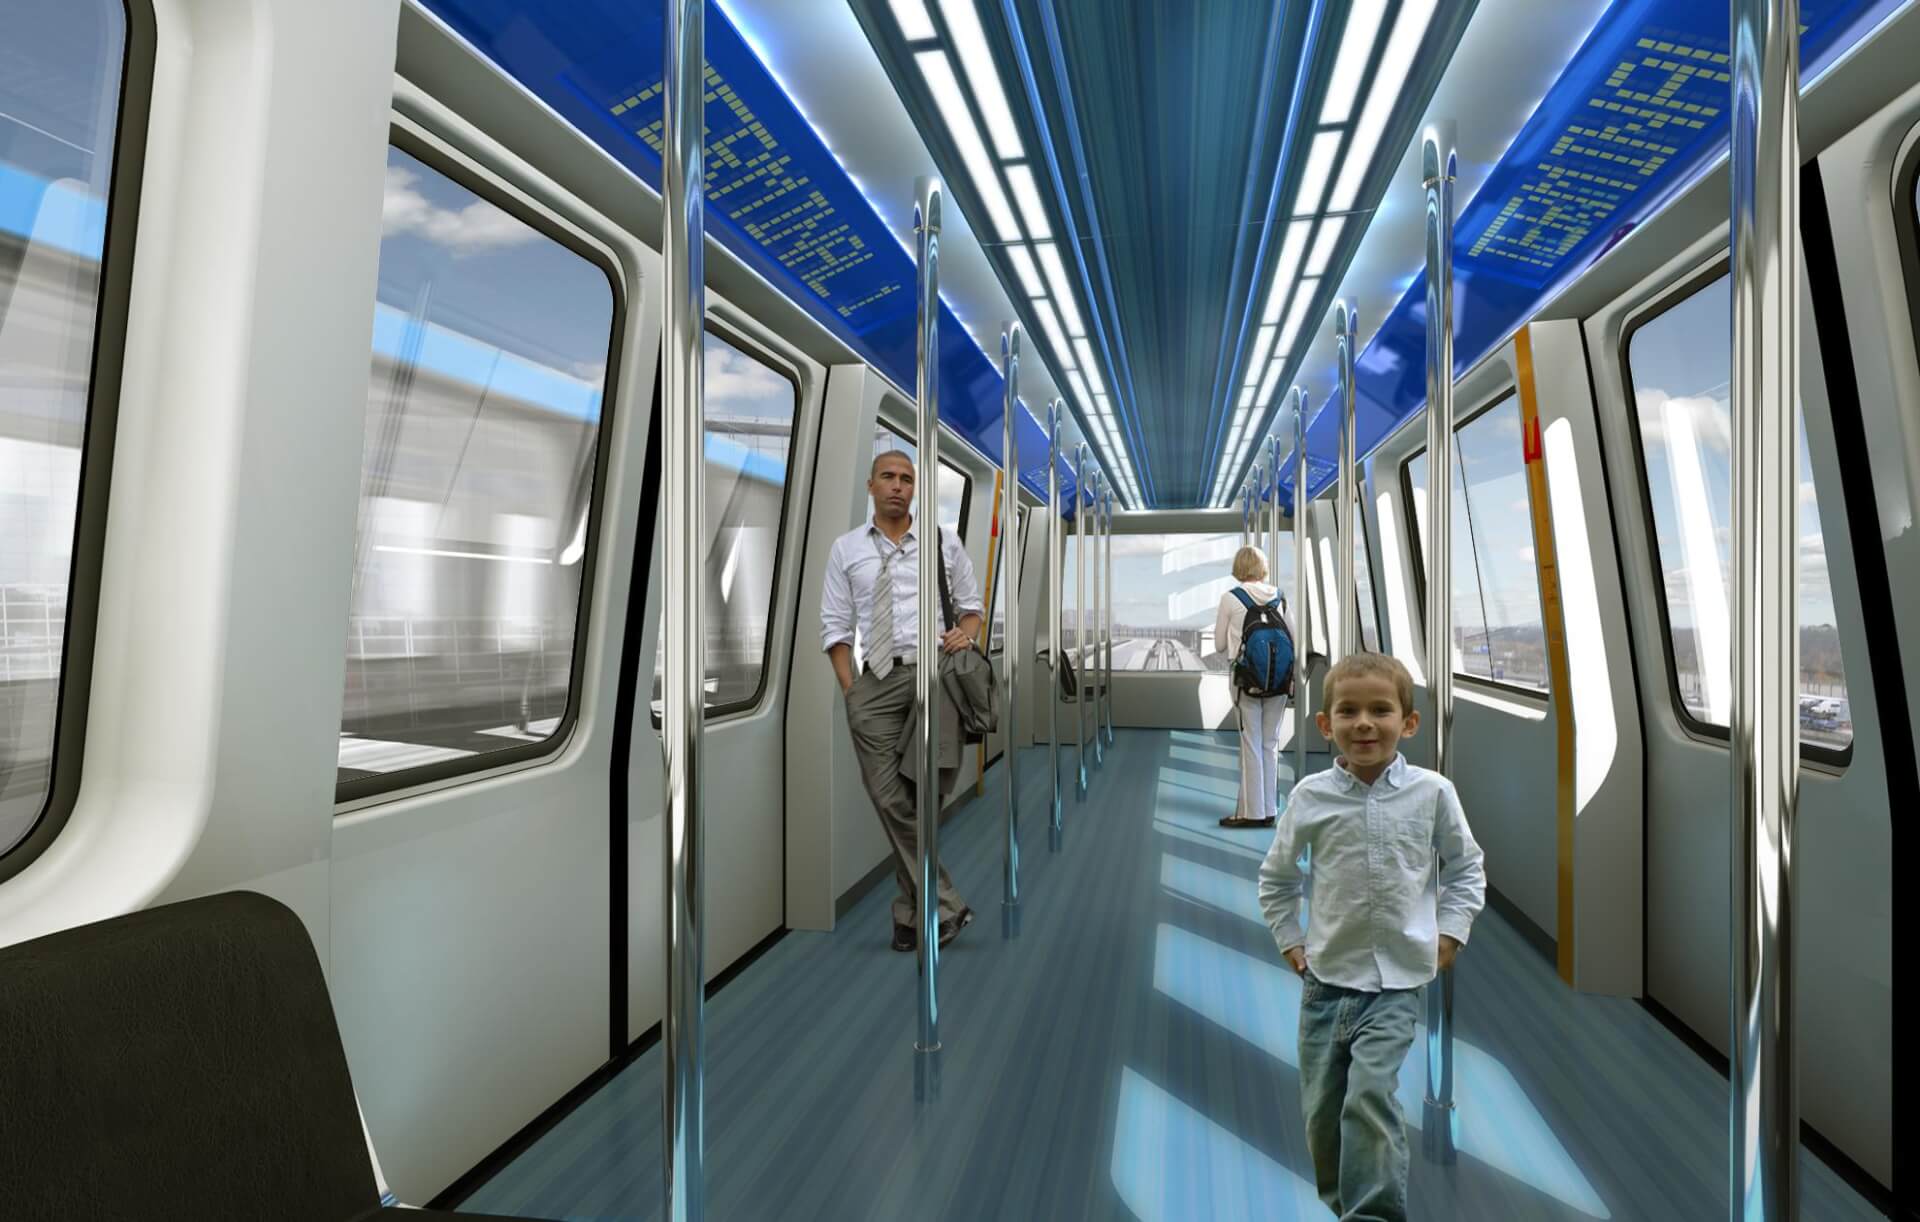 Industrial Design, Transportation Design, Rendering of a modern automated train system